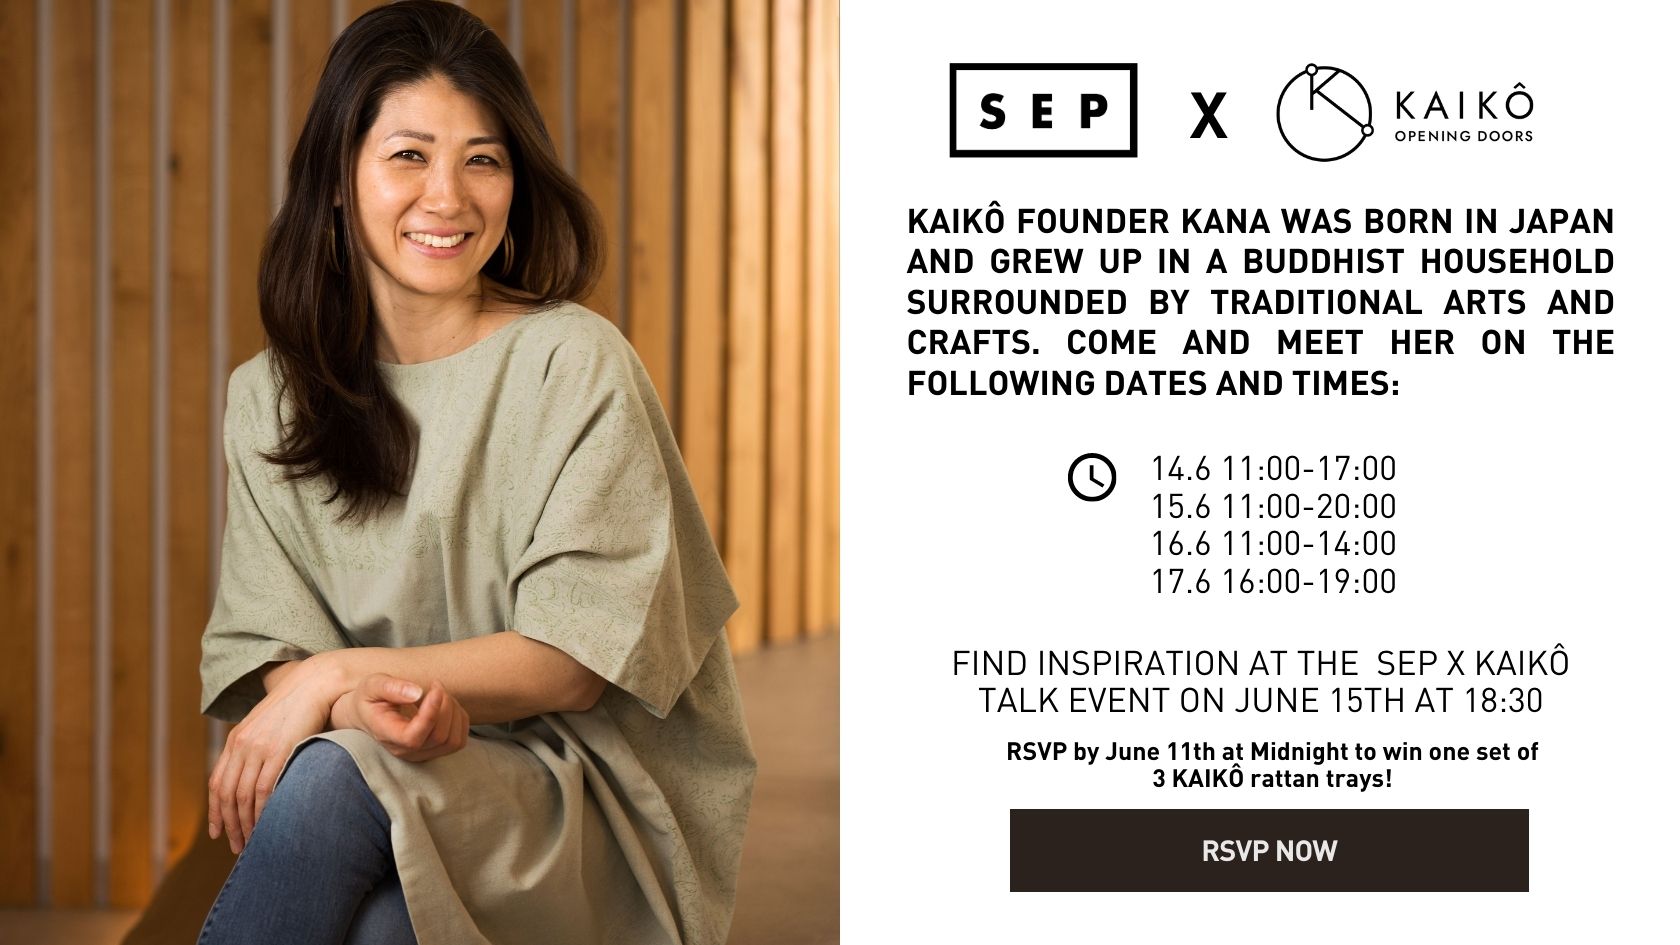 Kaikô Founder Kana was born in Japan and grew up in a Buddhist household surrounded by traditional arts and crafts. Come and meet her on the following dates and times: